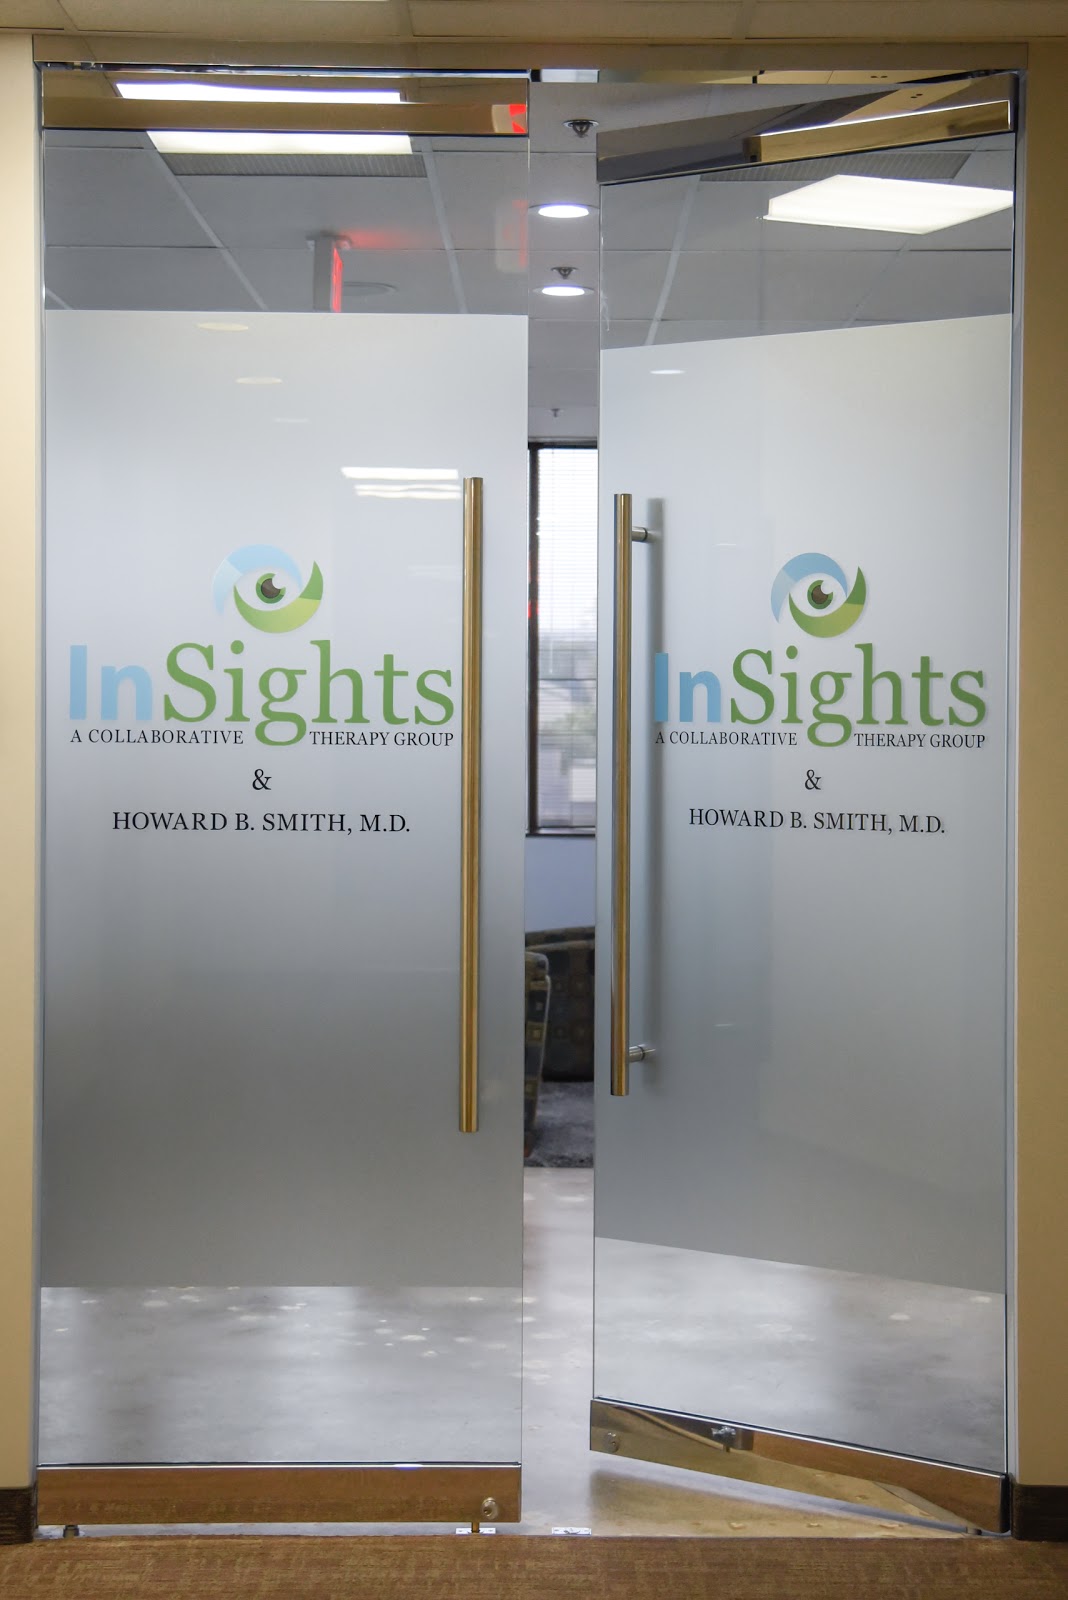 InSights Collaborative Therapy Group